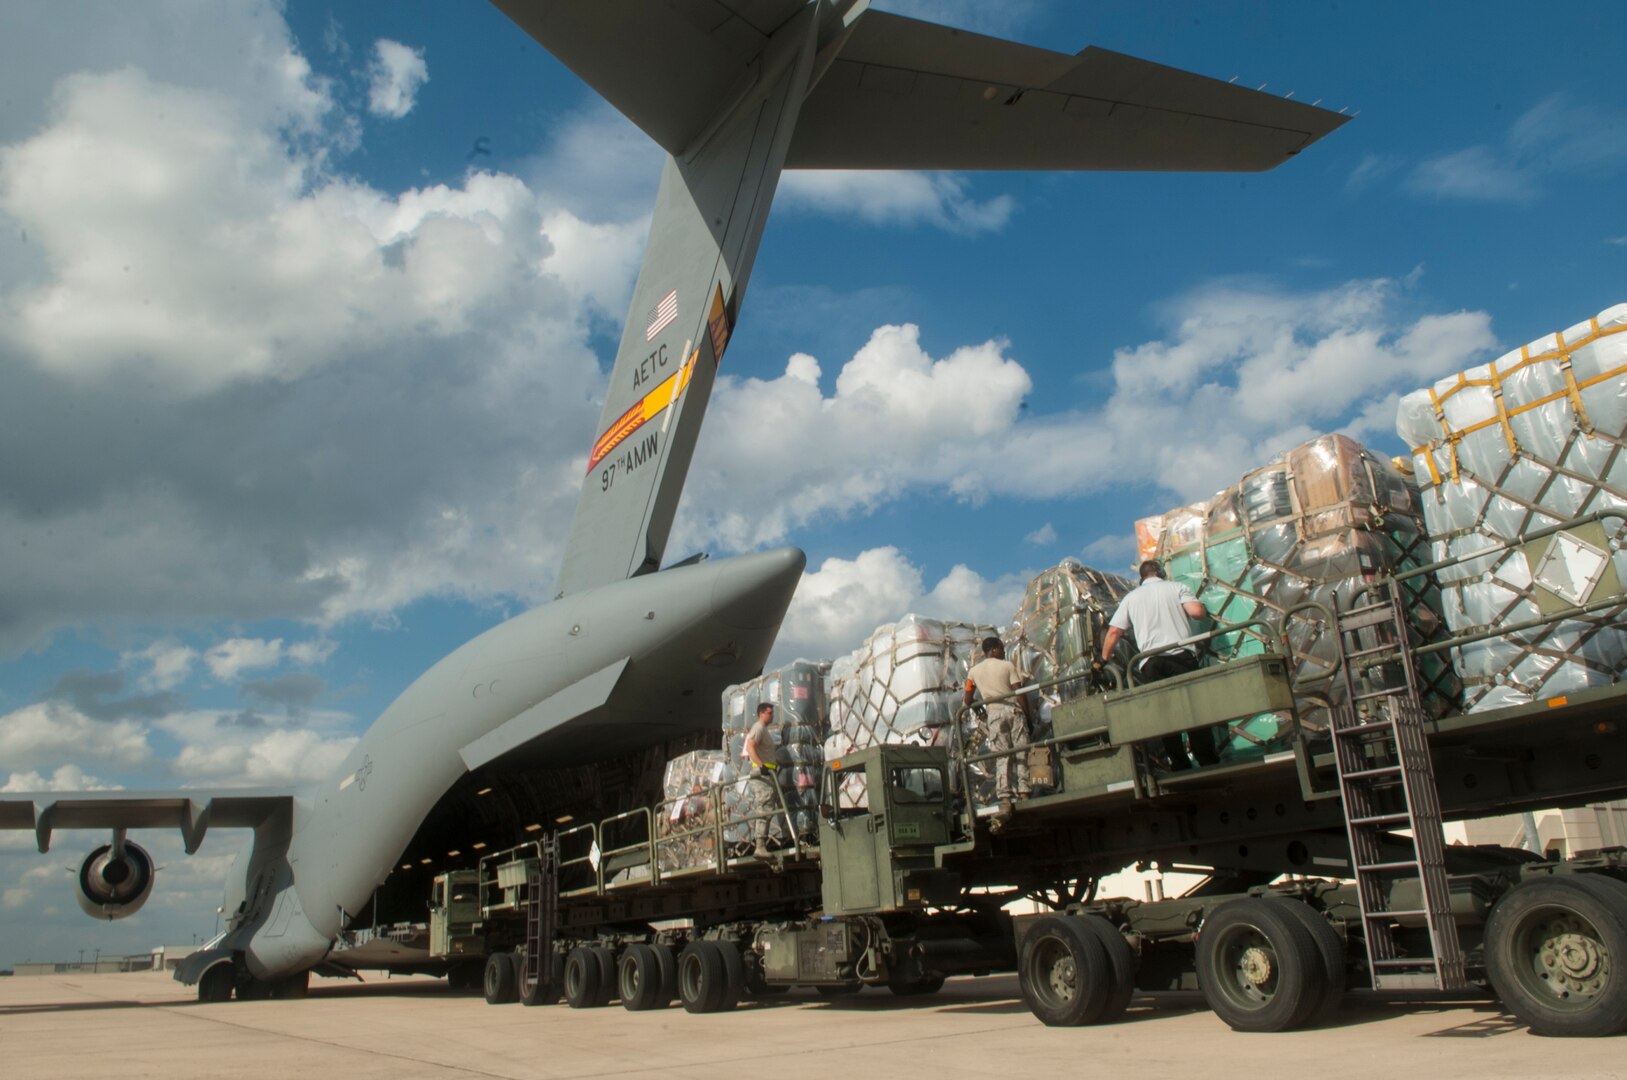 Airmen from the 502nd Logistics Readiness Squadron, Lackland JBSA, load medical supplies from the Air Force Medical Operations Agency onto a C-17 Globemaster III at Kelly Field Annex, Sept. 25, 2014. The C-17 was deployed from Altus AFB -- 97 Air Mobility Wing to support United States Africa Command and United Nations operations and efforts to fortify global health security infrastructure in the region and beyond. (U.S. Air Force photo by Airman Justine K. Rho)